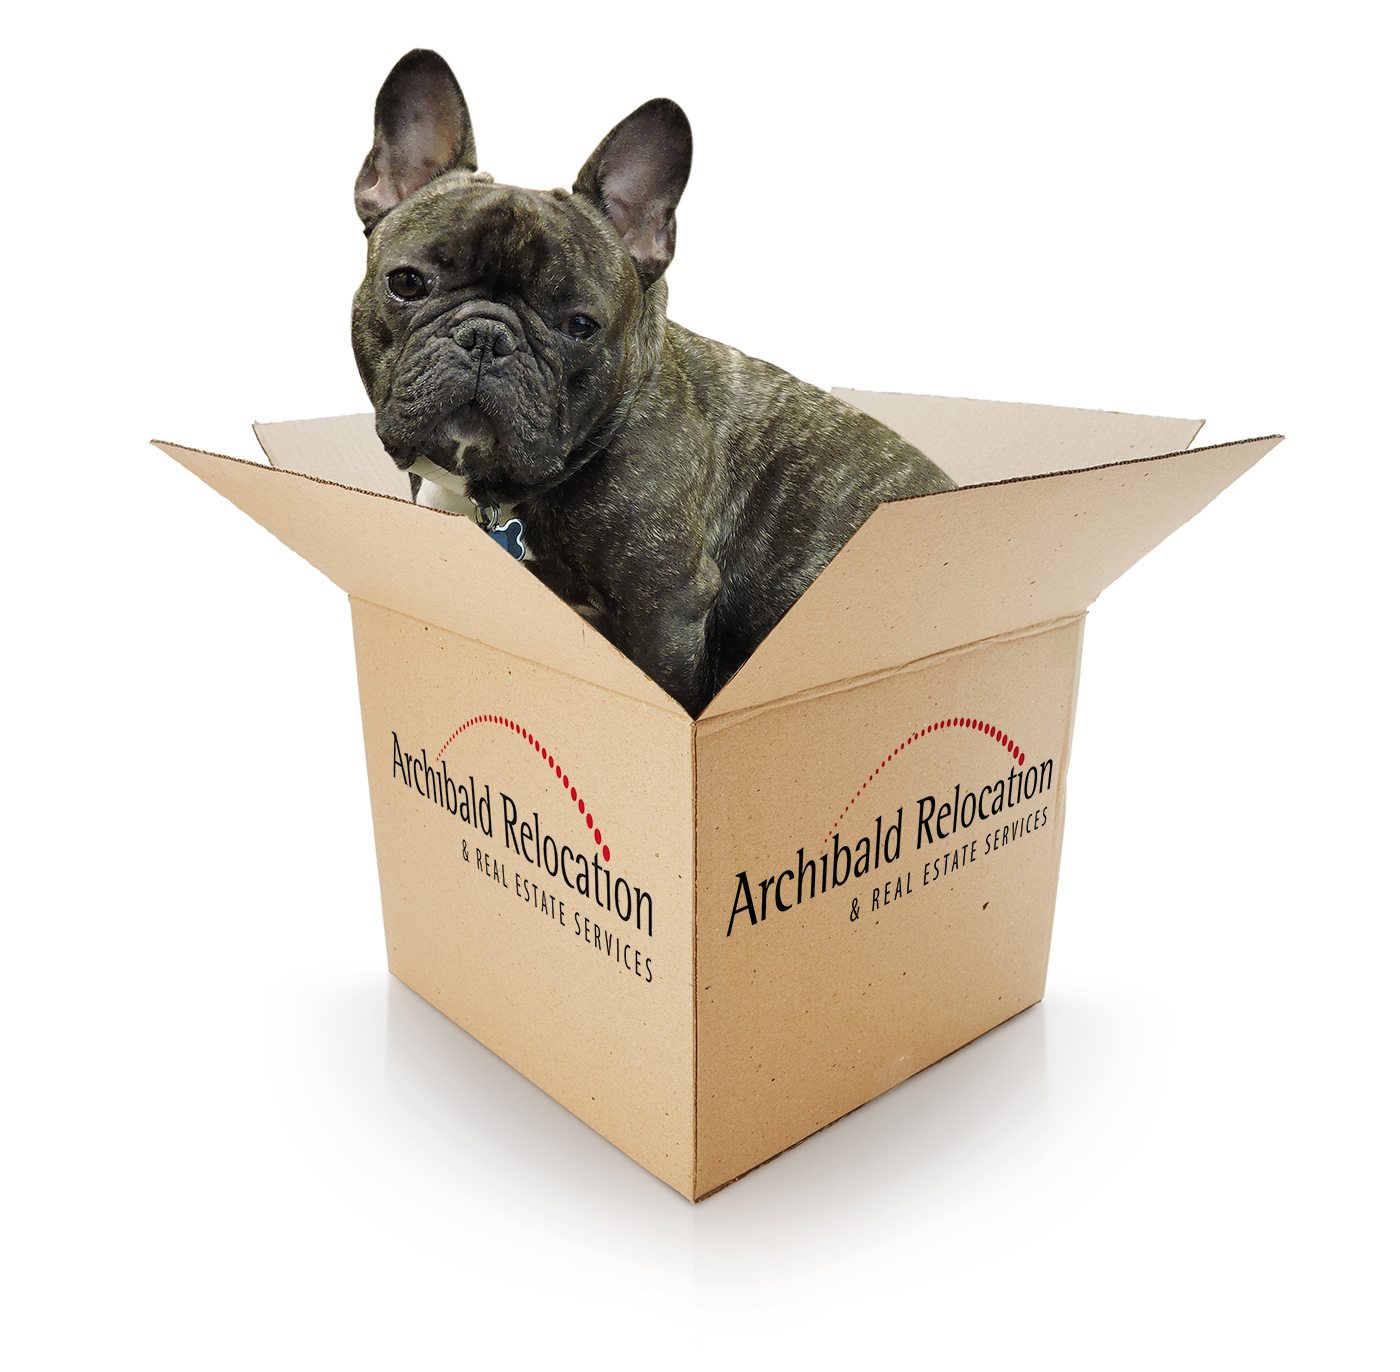 Portland Relocation Services 33 Simple Ways to Keep Your Dog Busy Indoors -  Archibald Relocation